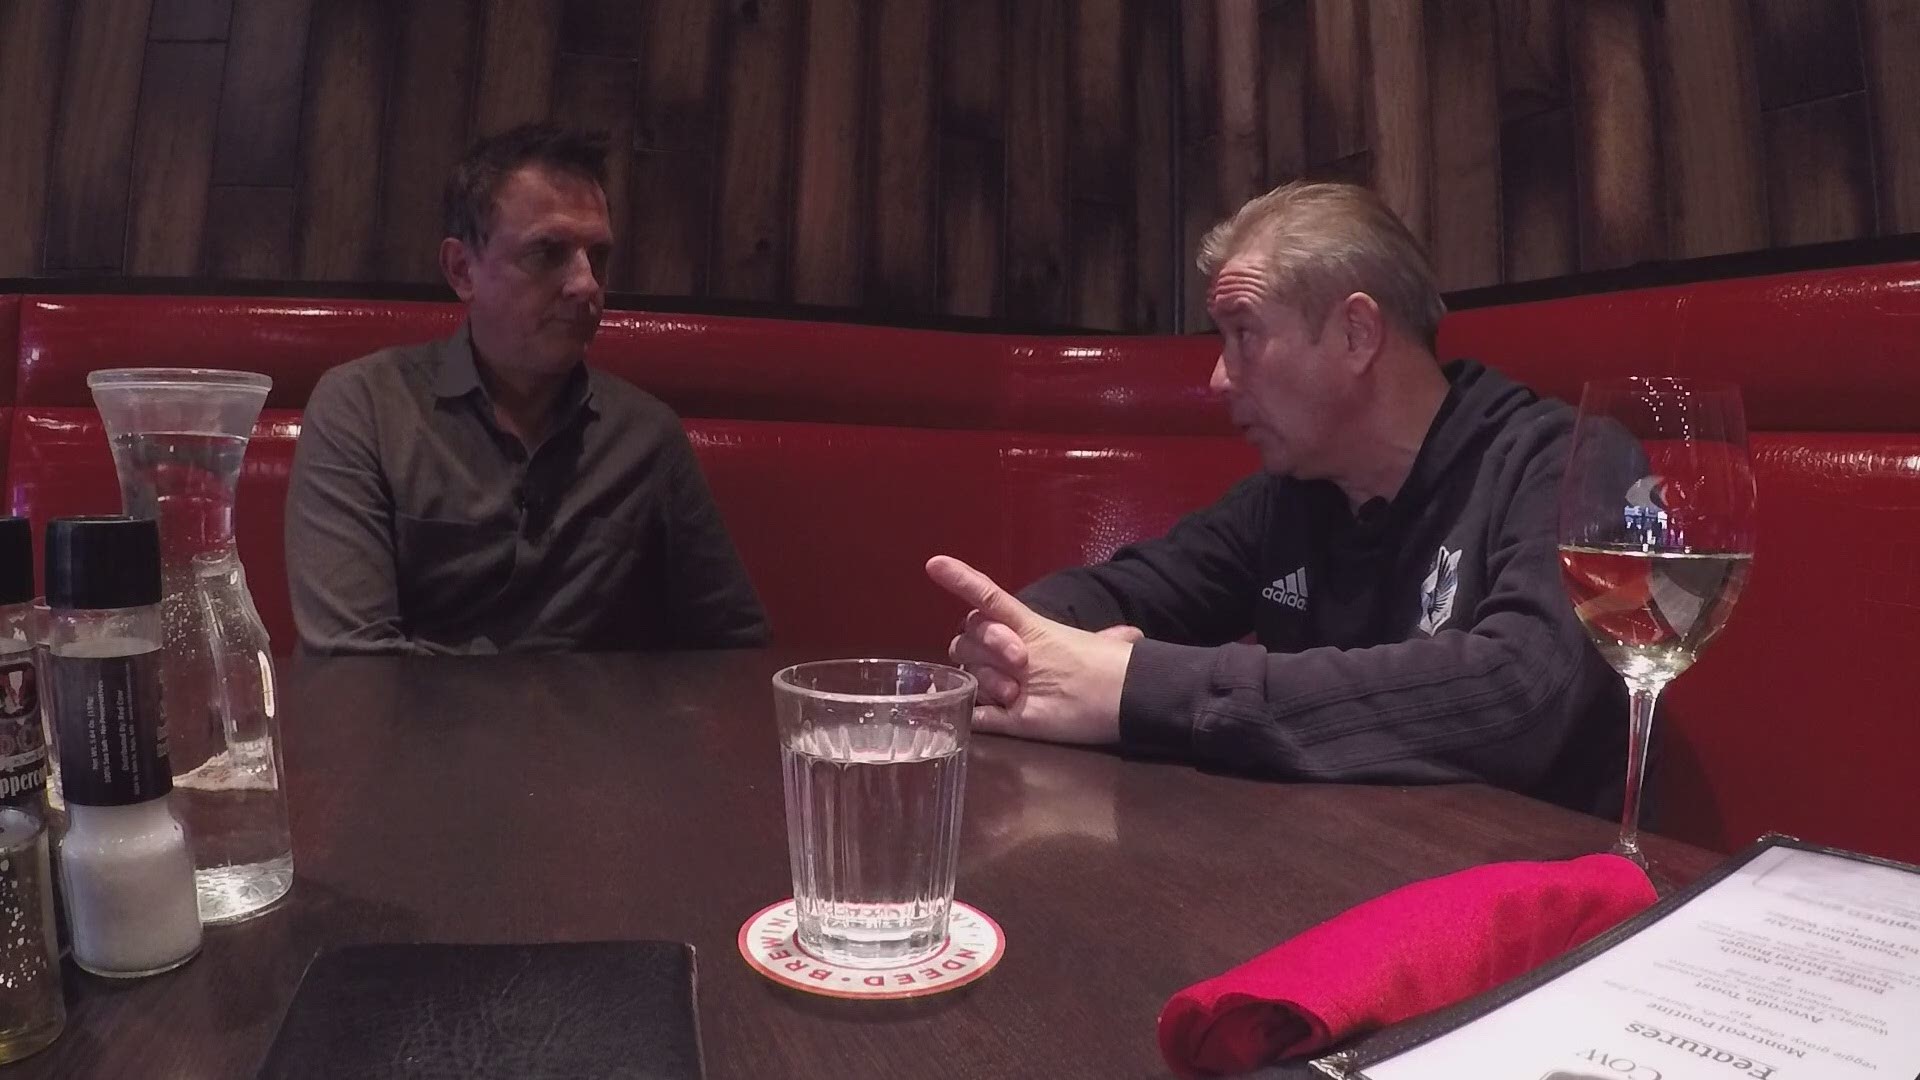 On this the final episode of the season of Yo Adrian, Perk sits down with Minnesota United head coach Adrian Heath in their regular corner booth at Red Cow restaurant to discuss the season that was.